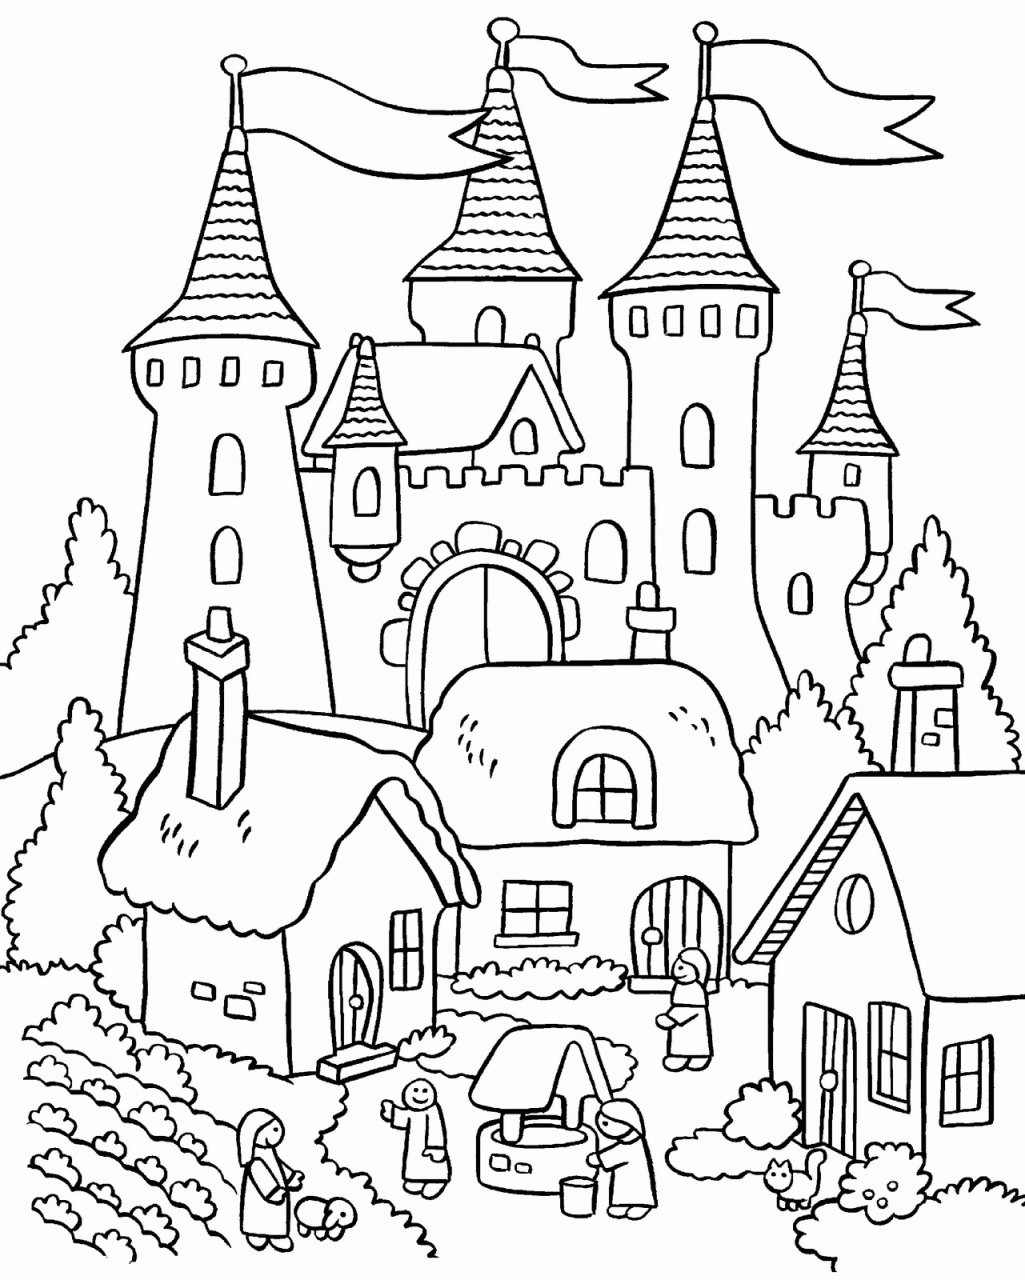 Free Full House Coloring Pages To Print, Download Free Full House